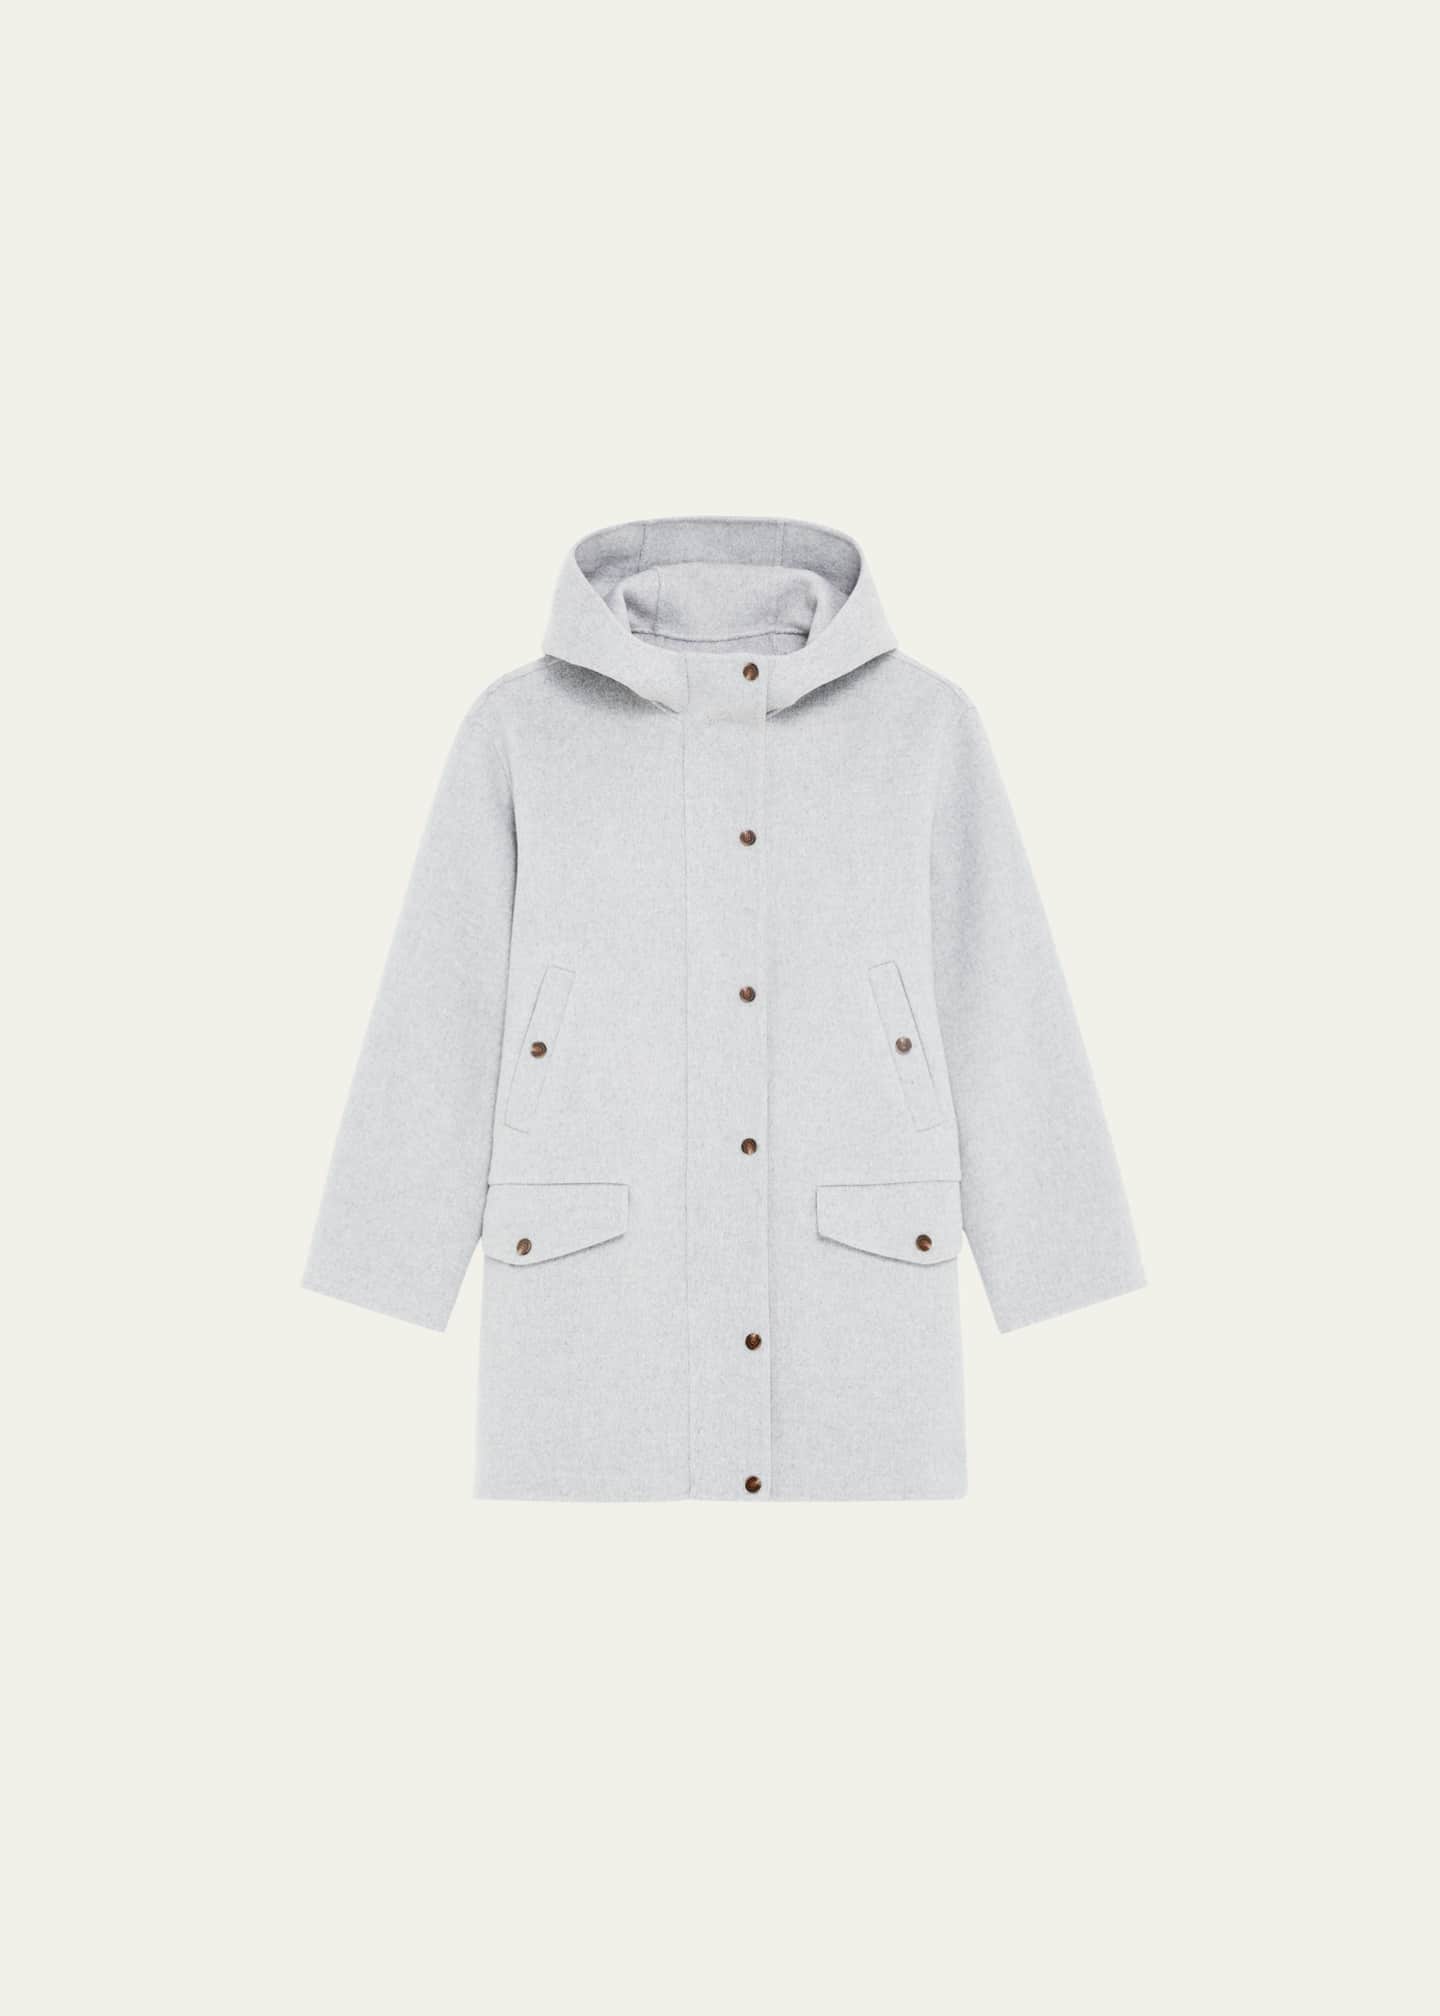 Theory Women's Double-Face Hooded Parka